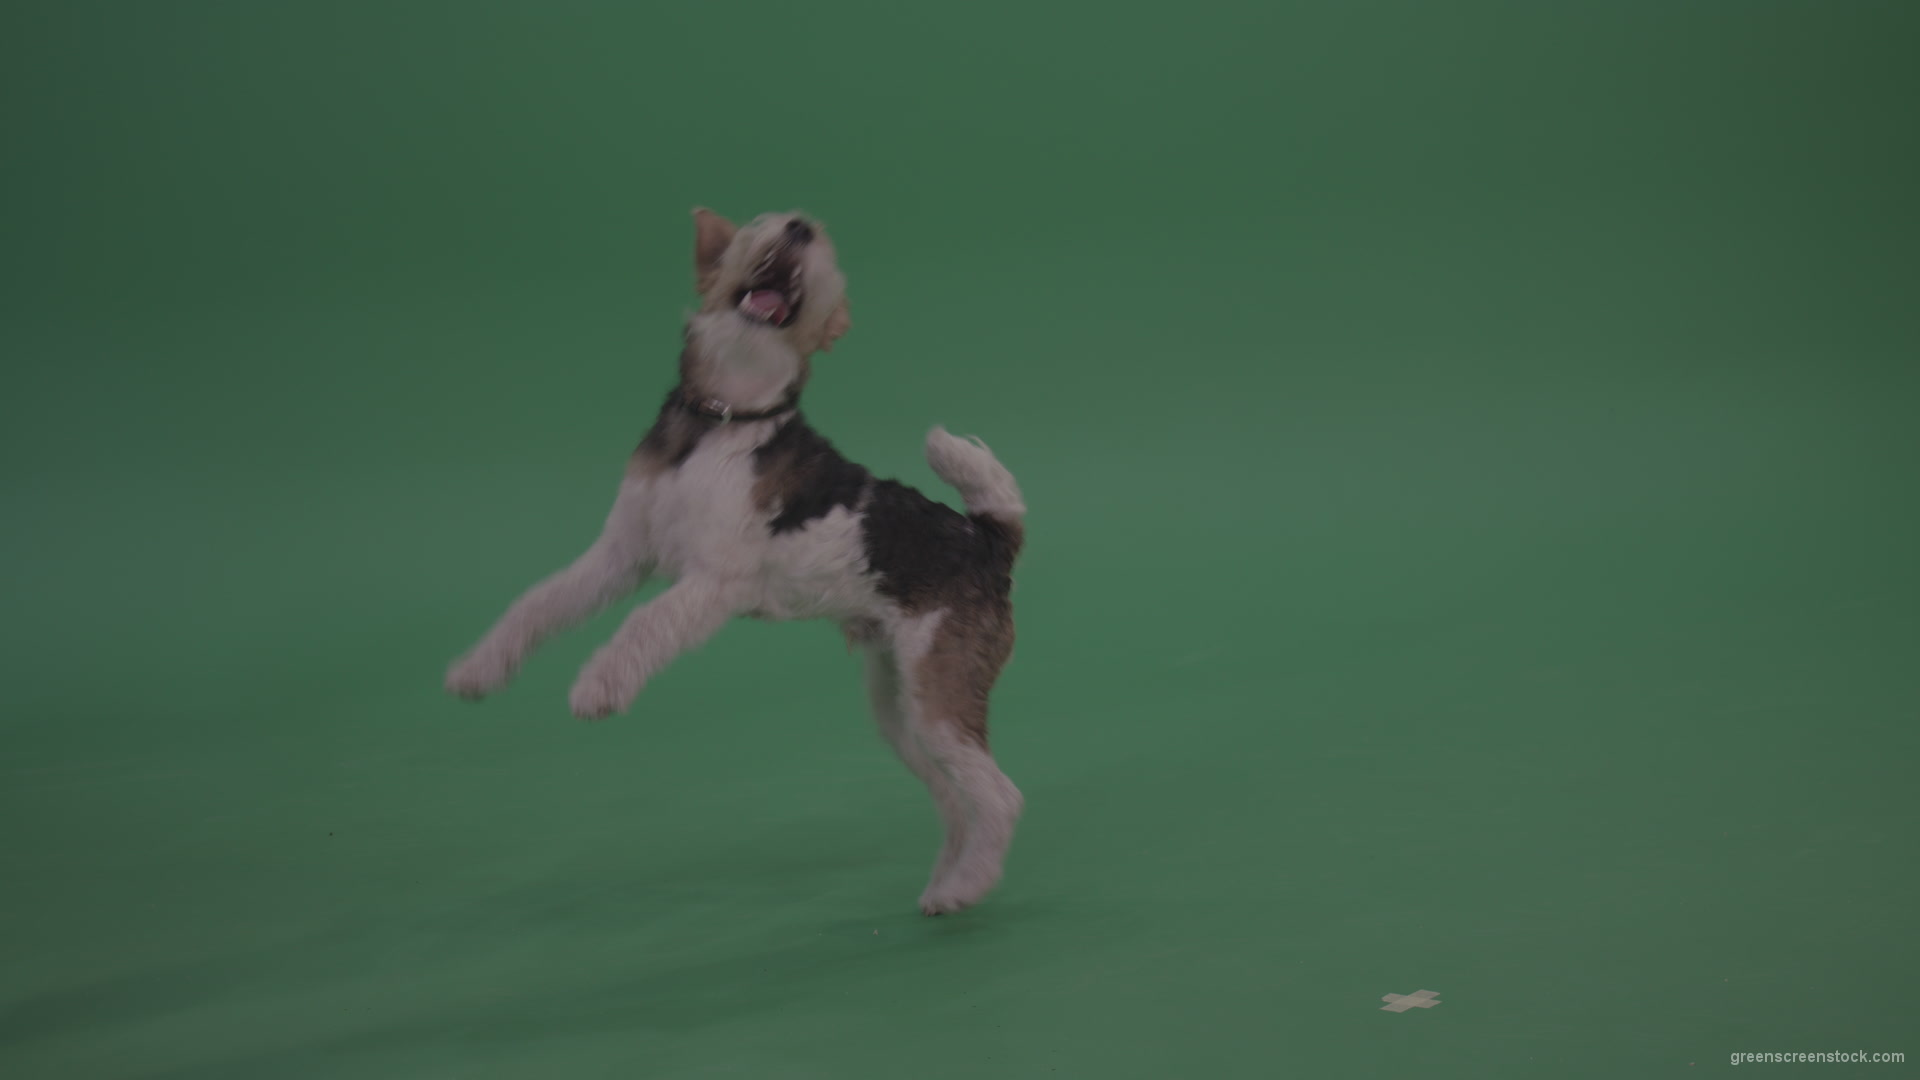 Wire-Fox-Terrier-Is-Running-And-Jumping-All-Around-Playing-Following-And-Trying-To-Catch-Leash-On-Green-Screen-Chroma-Key-Wall-Background_002 Green Screen Stock